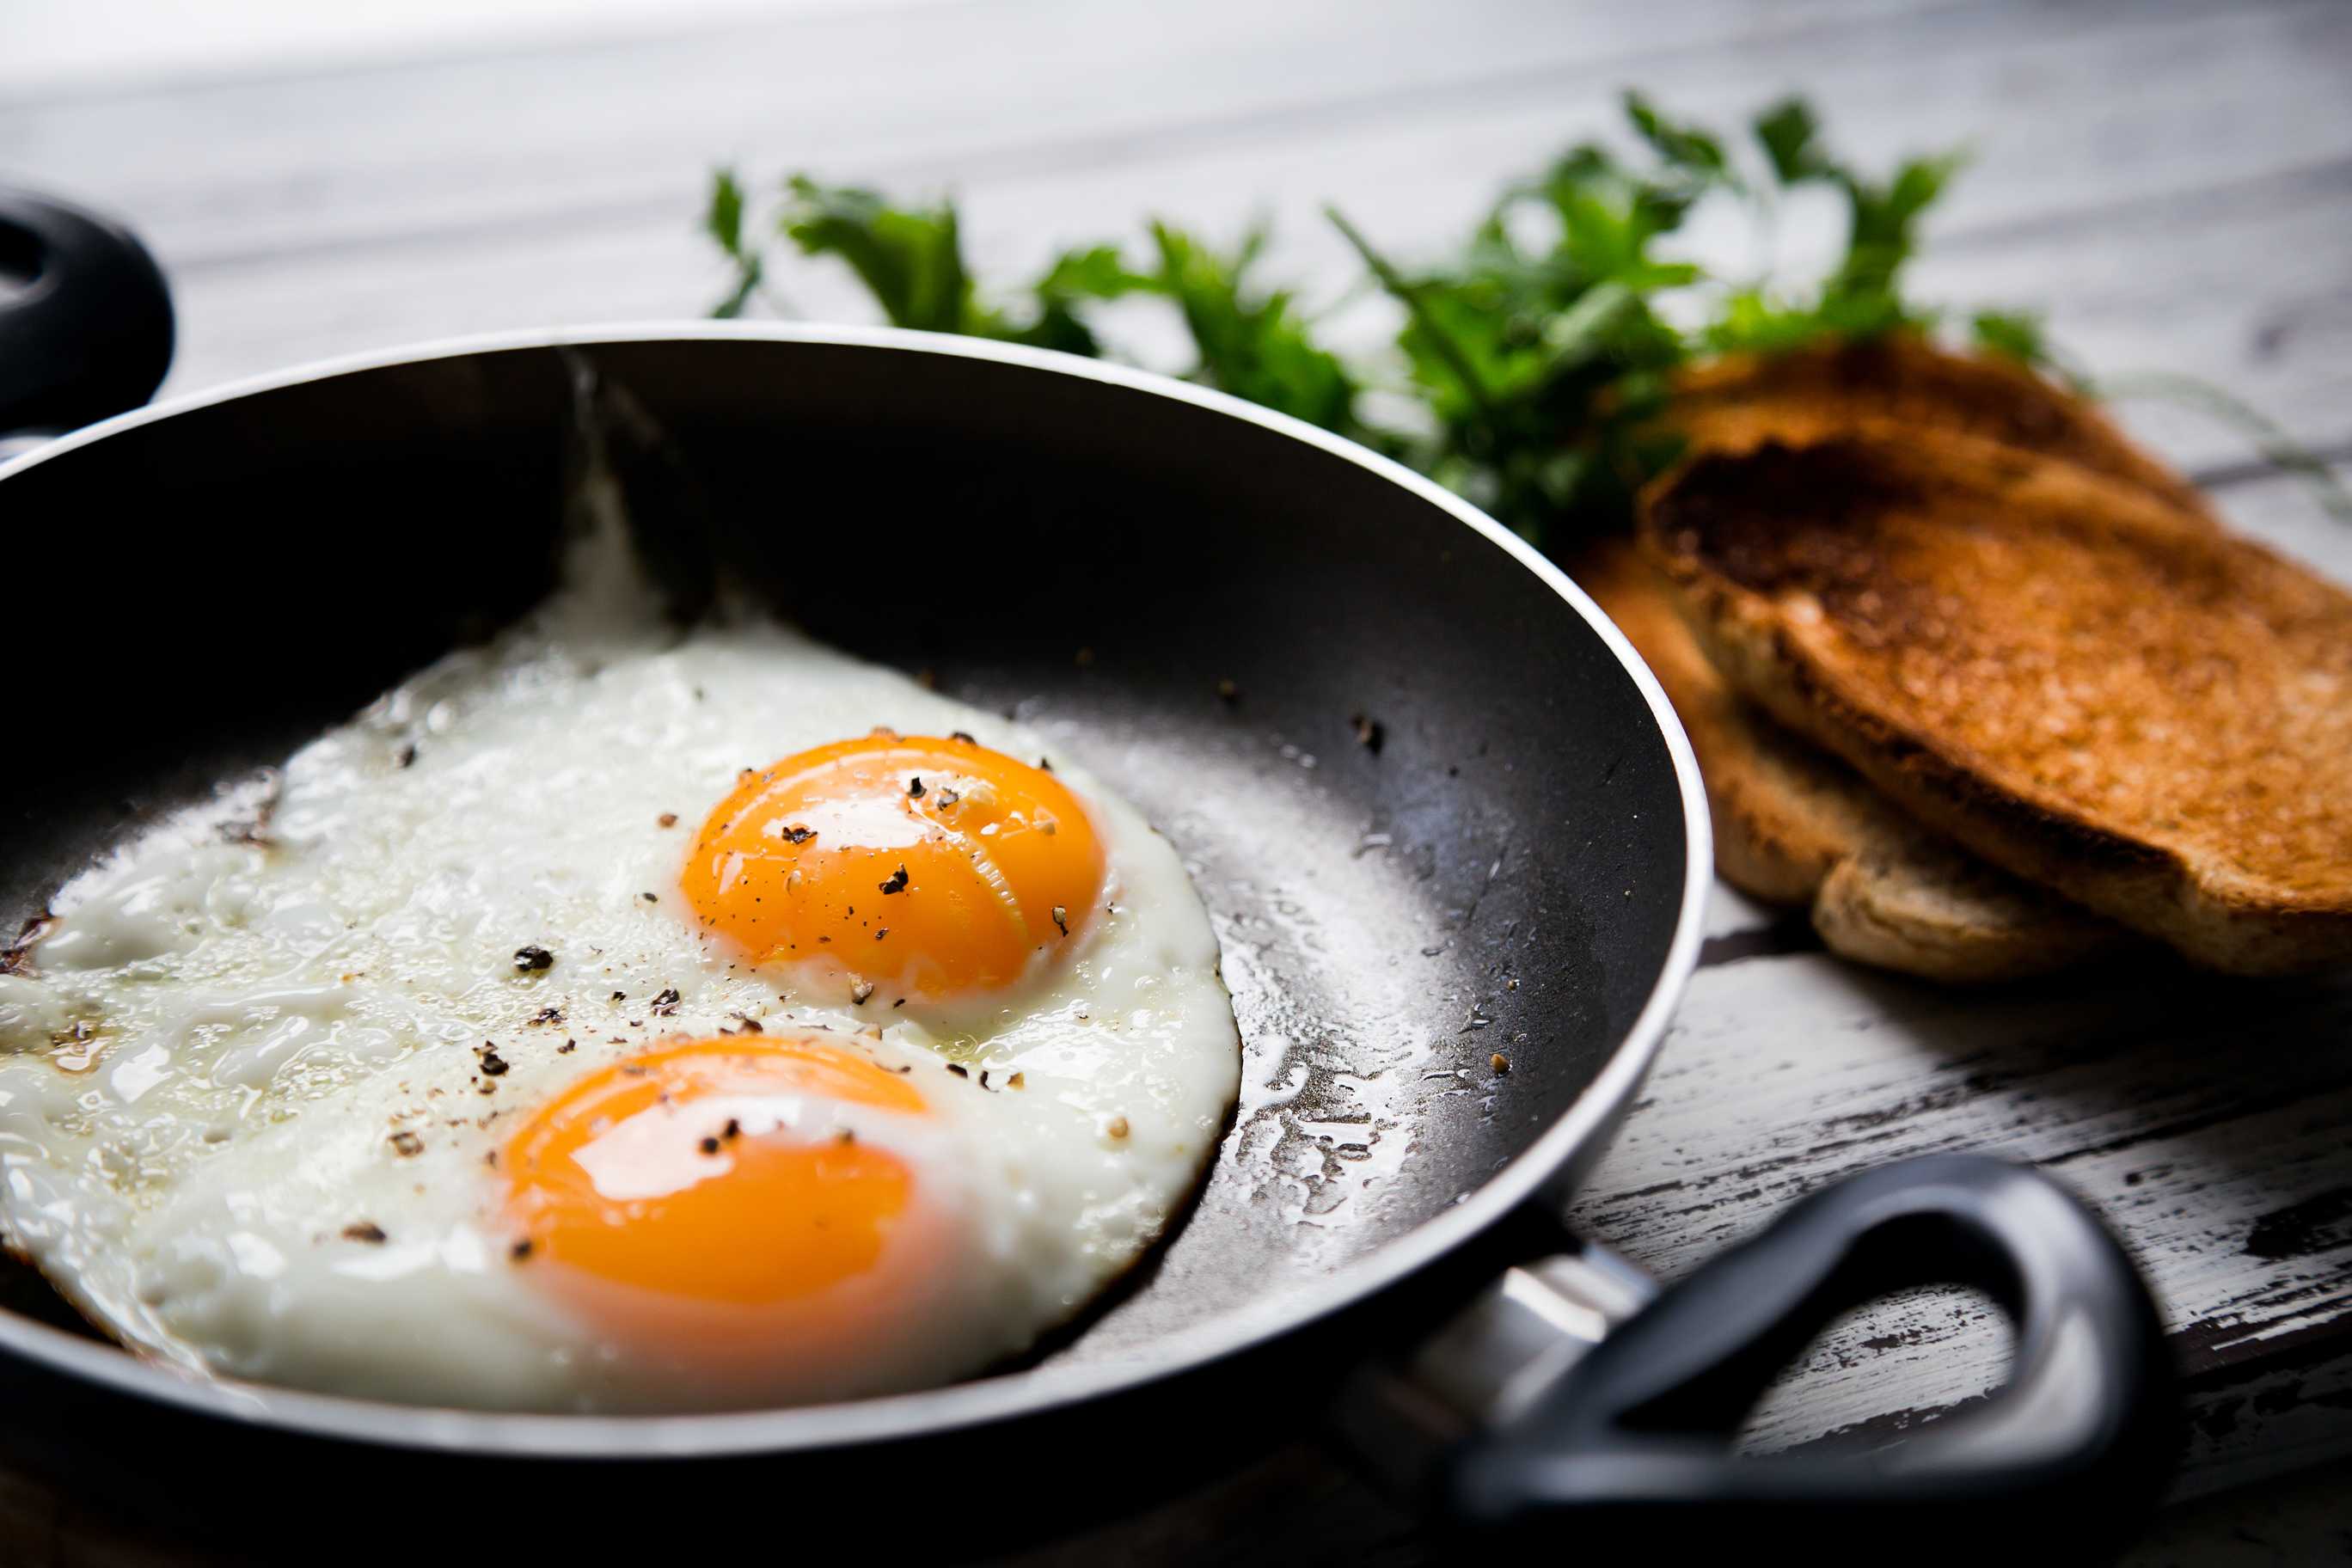 microsoft, are eggs good for humans? a review by nutrition professionals